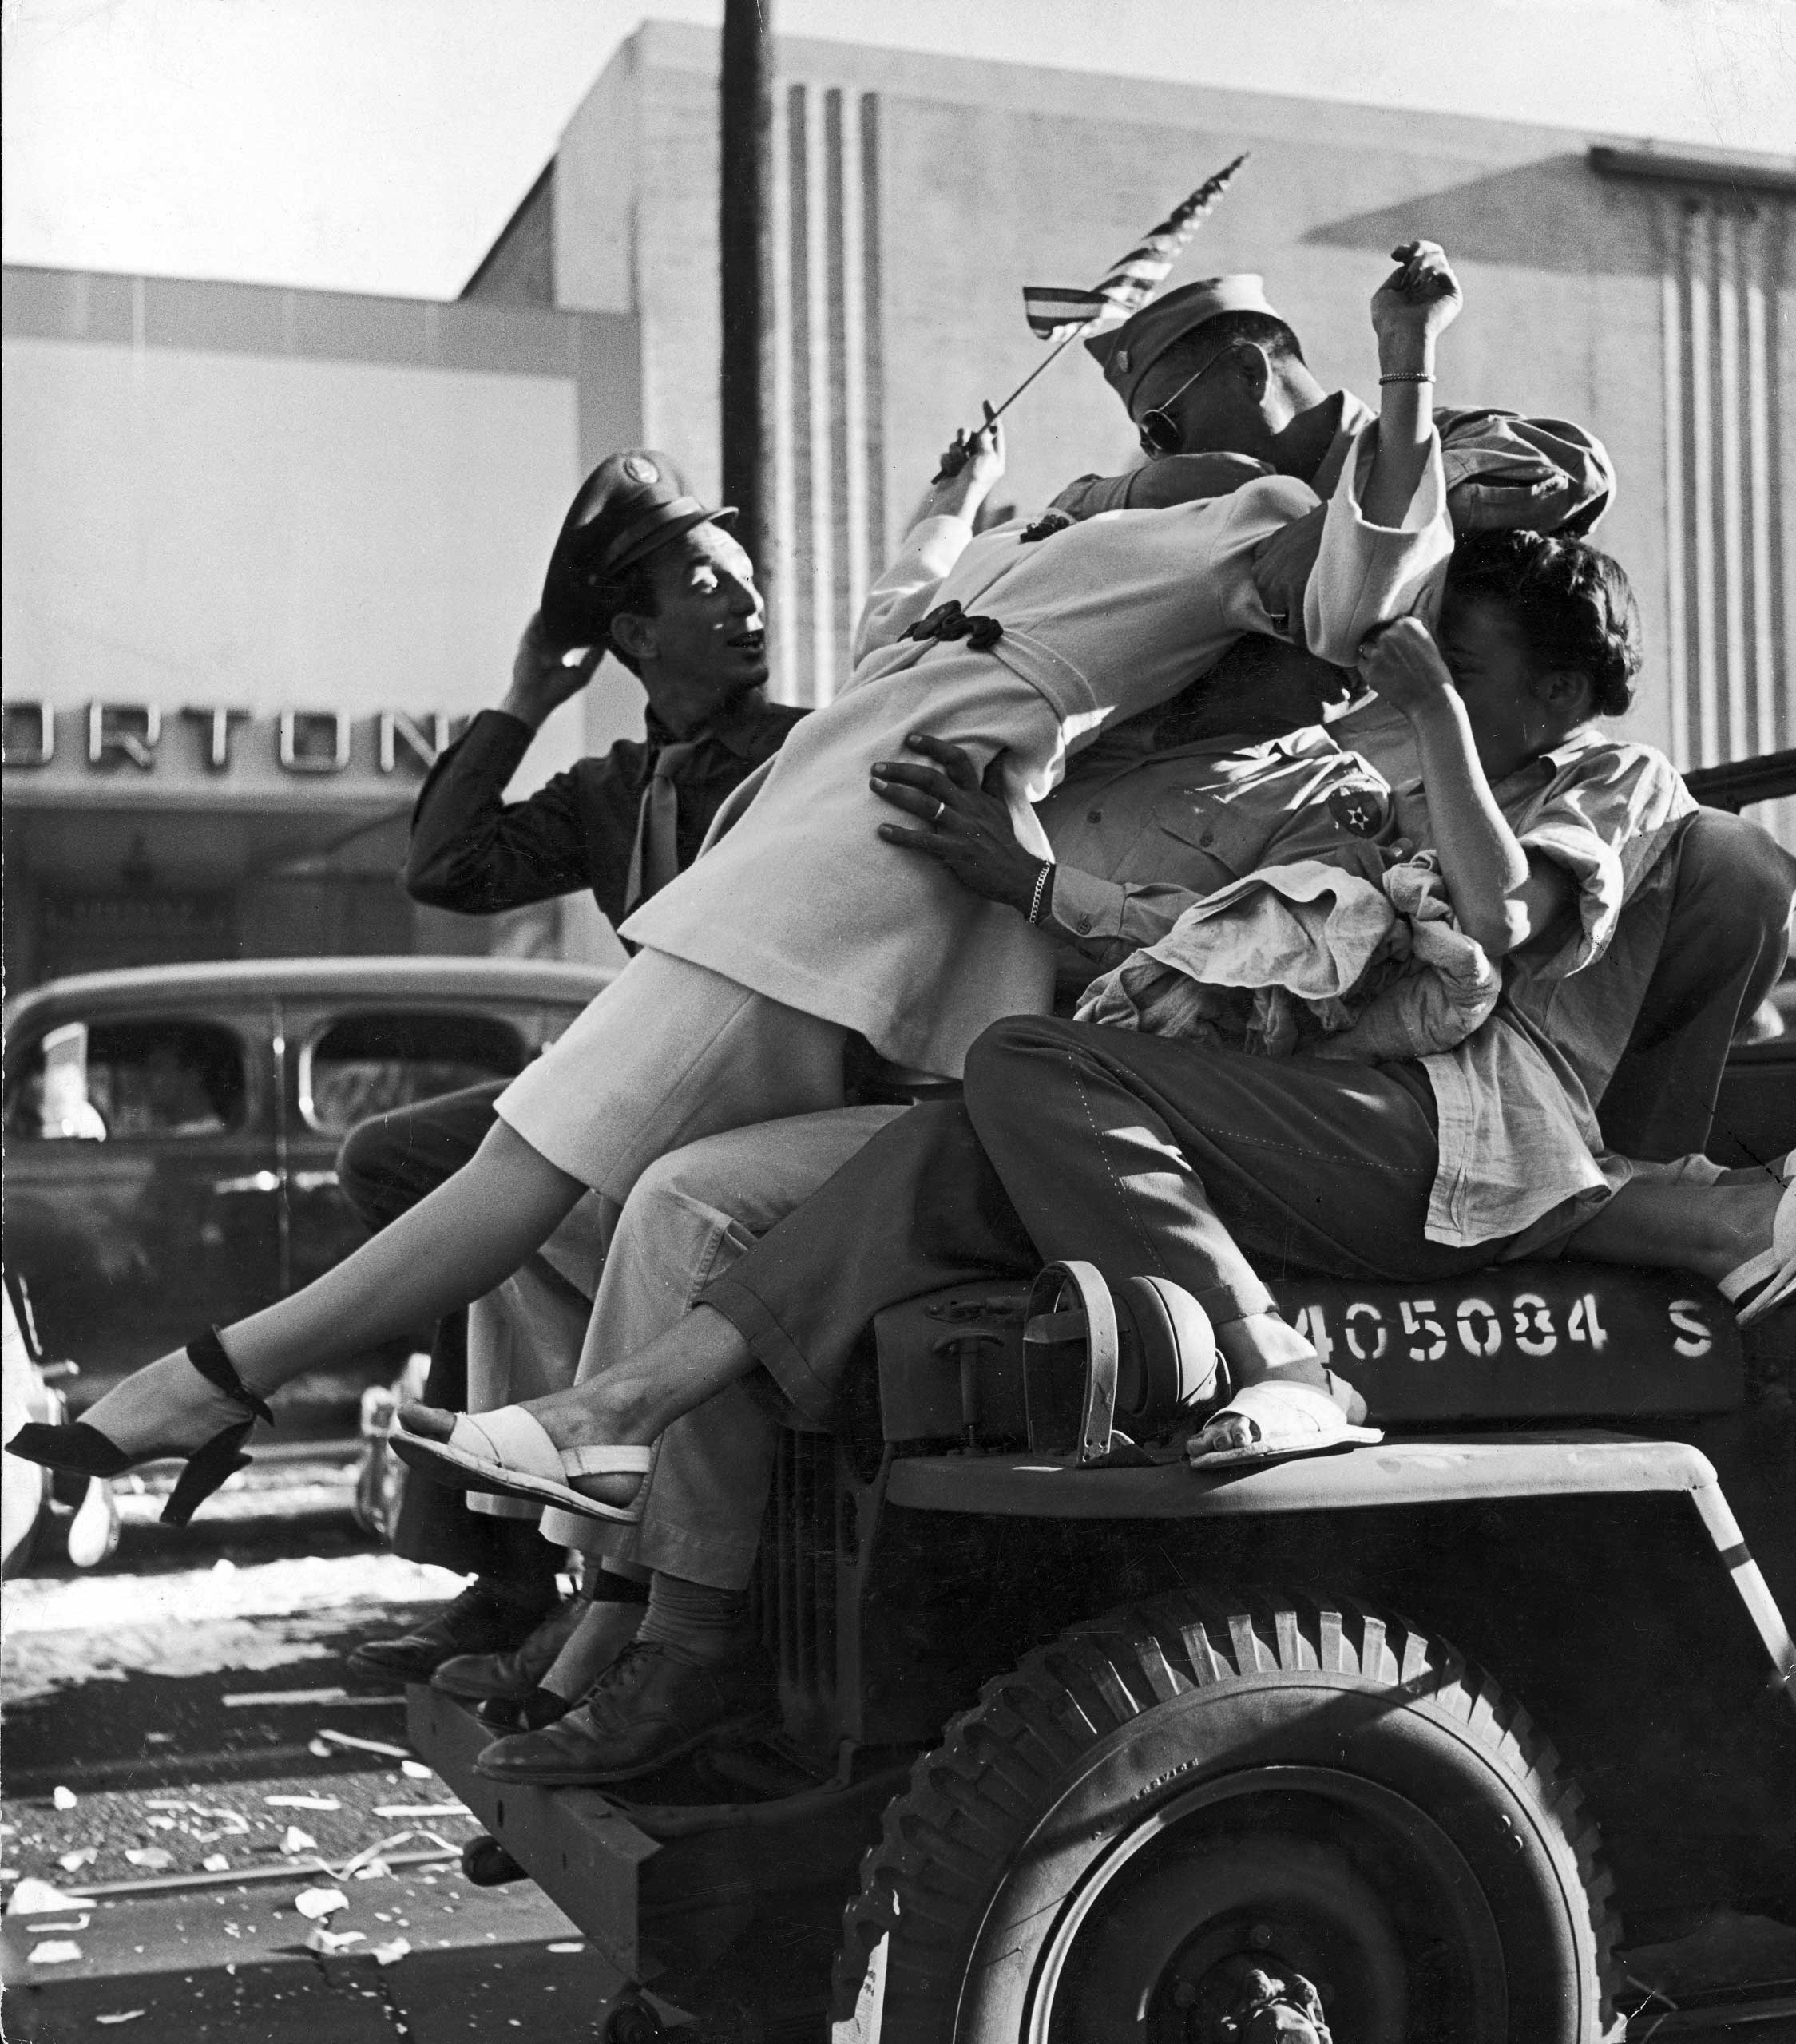 "On Hollywood Boulevard in Los Angeles carousing servicemen neck atop the hood of a careening jeep. The city rocked with joy as impromptu pedestrian parades and motor cavalcades whirled along, hindered only by hurled whiskey bottles, amorous drunks and collisions."